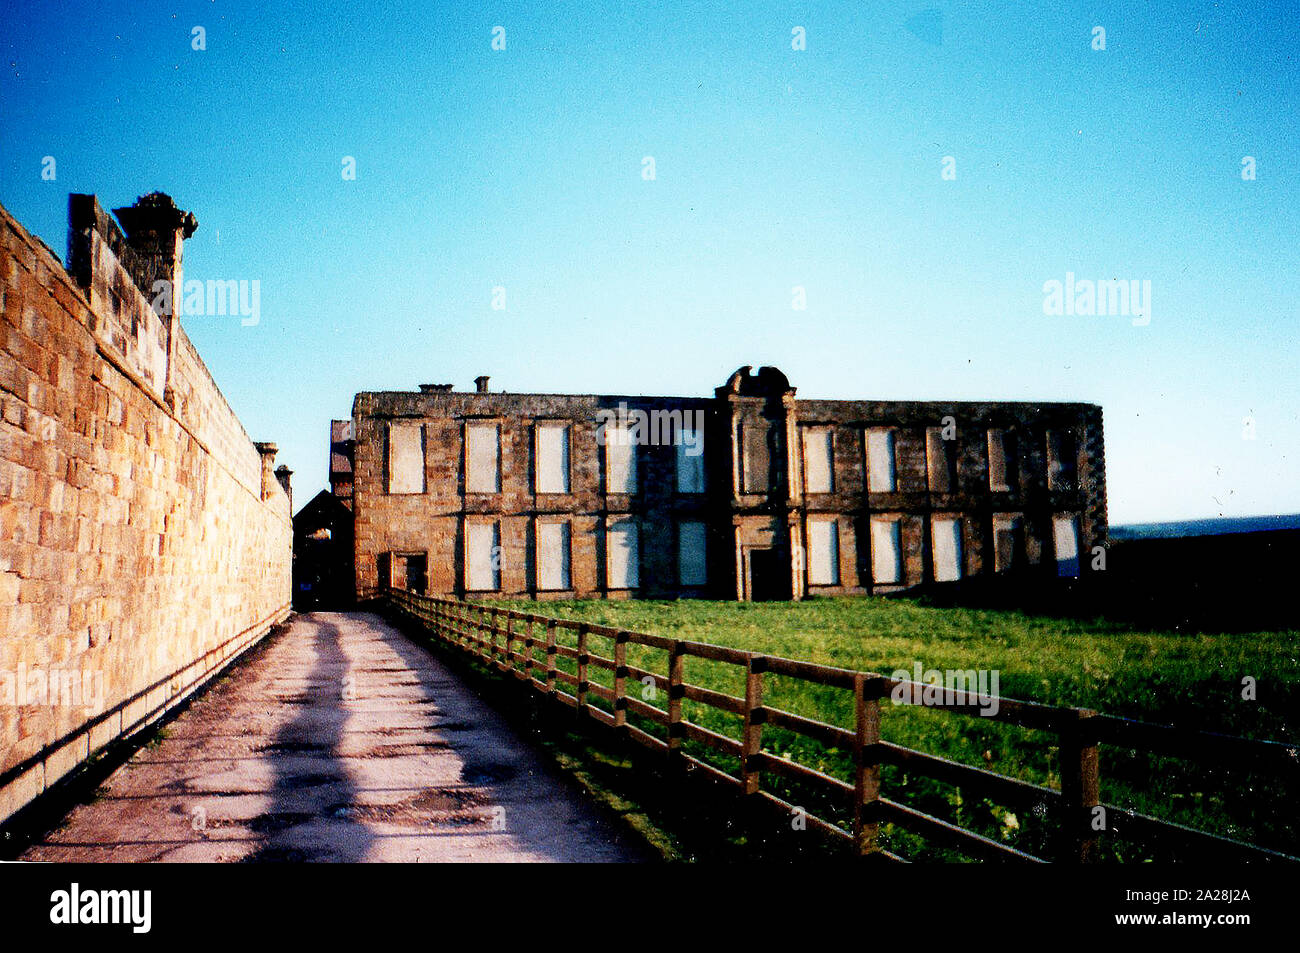 A vintage snapshot photograph at Whitby, North Yorkshire, showing the ruins of Abbey House (aka Whitby Hall, the Abbots House or the Banqueting Hall ). Photographed in 1997, before it was redeveloped into a museum, tourist visitor centre and YHA (Youth Hostels association) hostel. Stock Photo